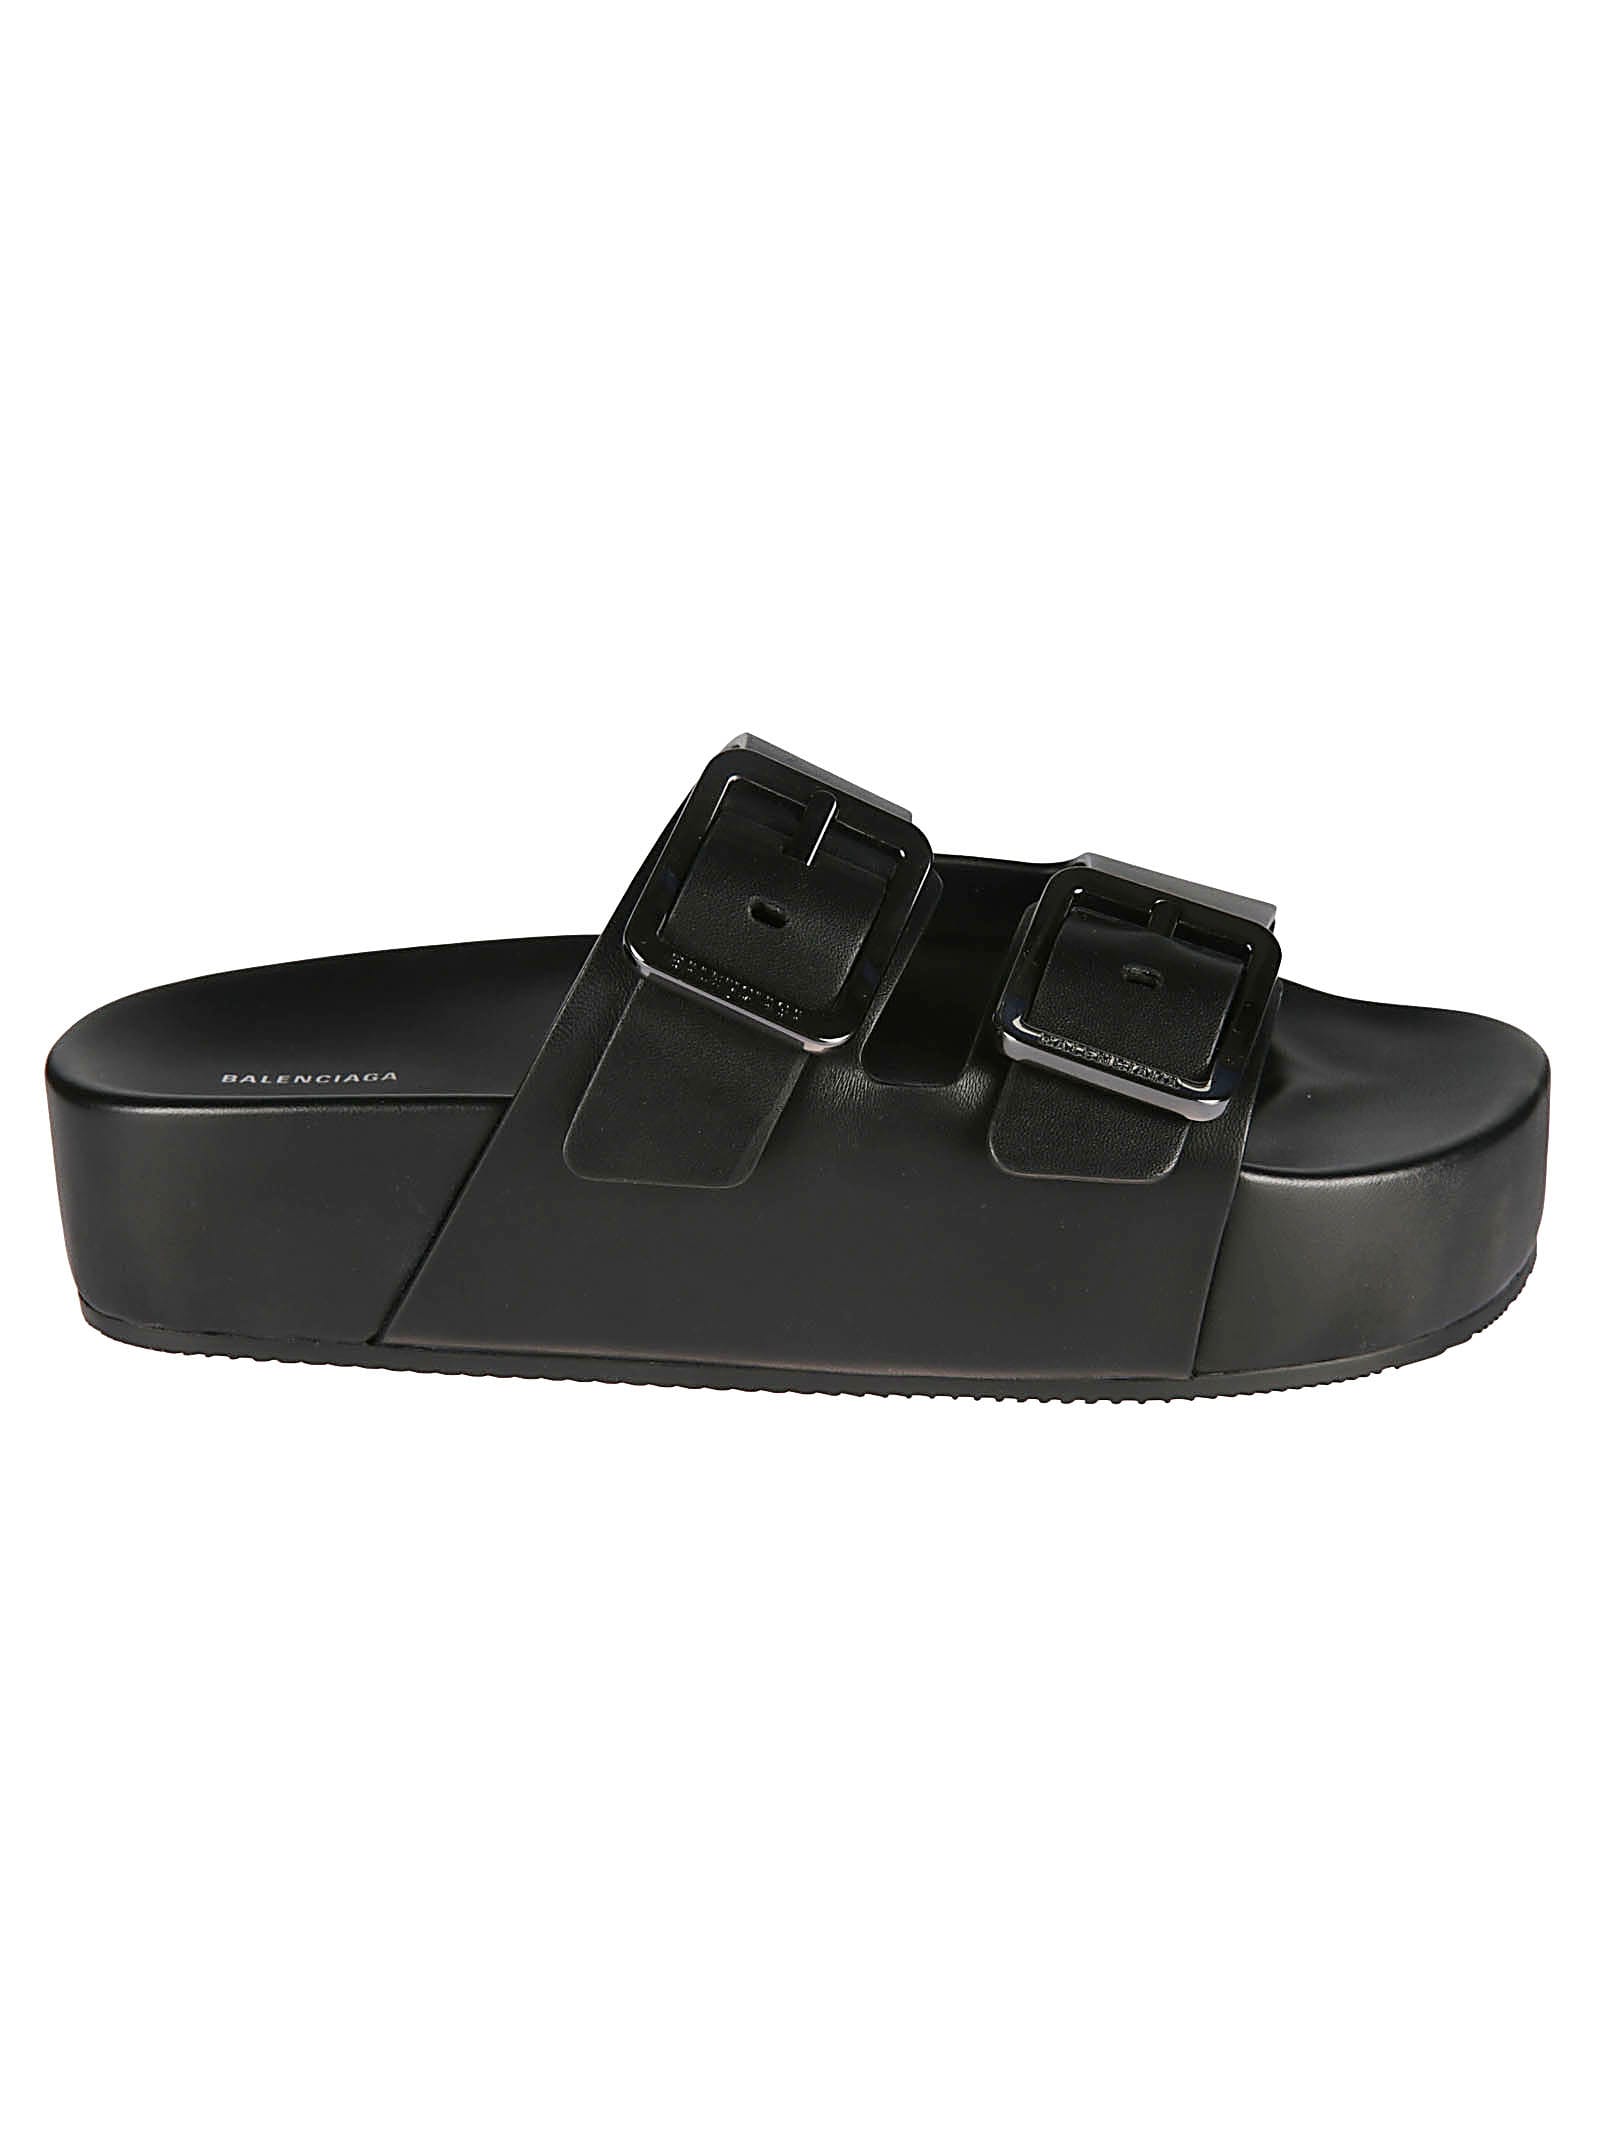 Balenciaga Double-strap Side Buckled Sandals